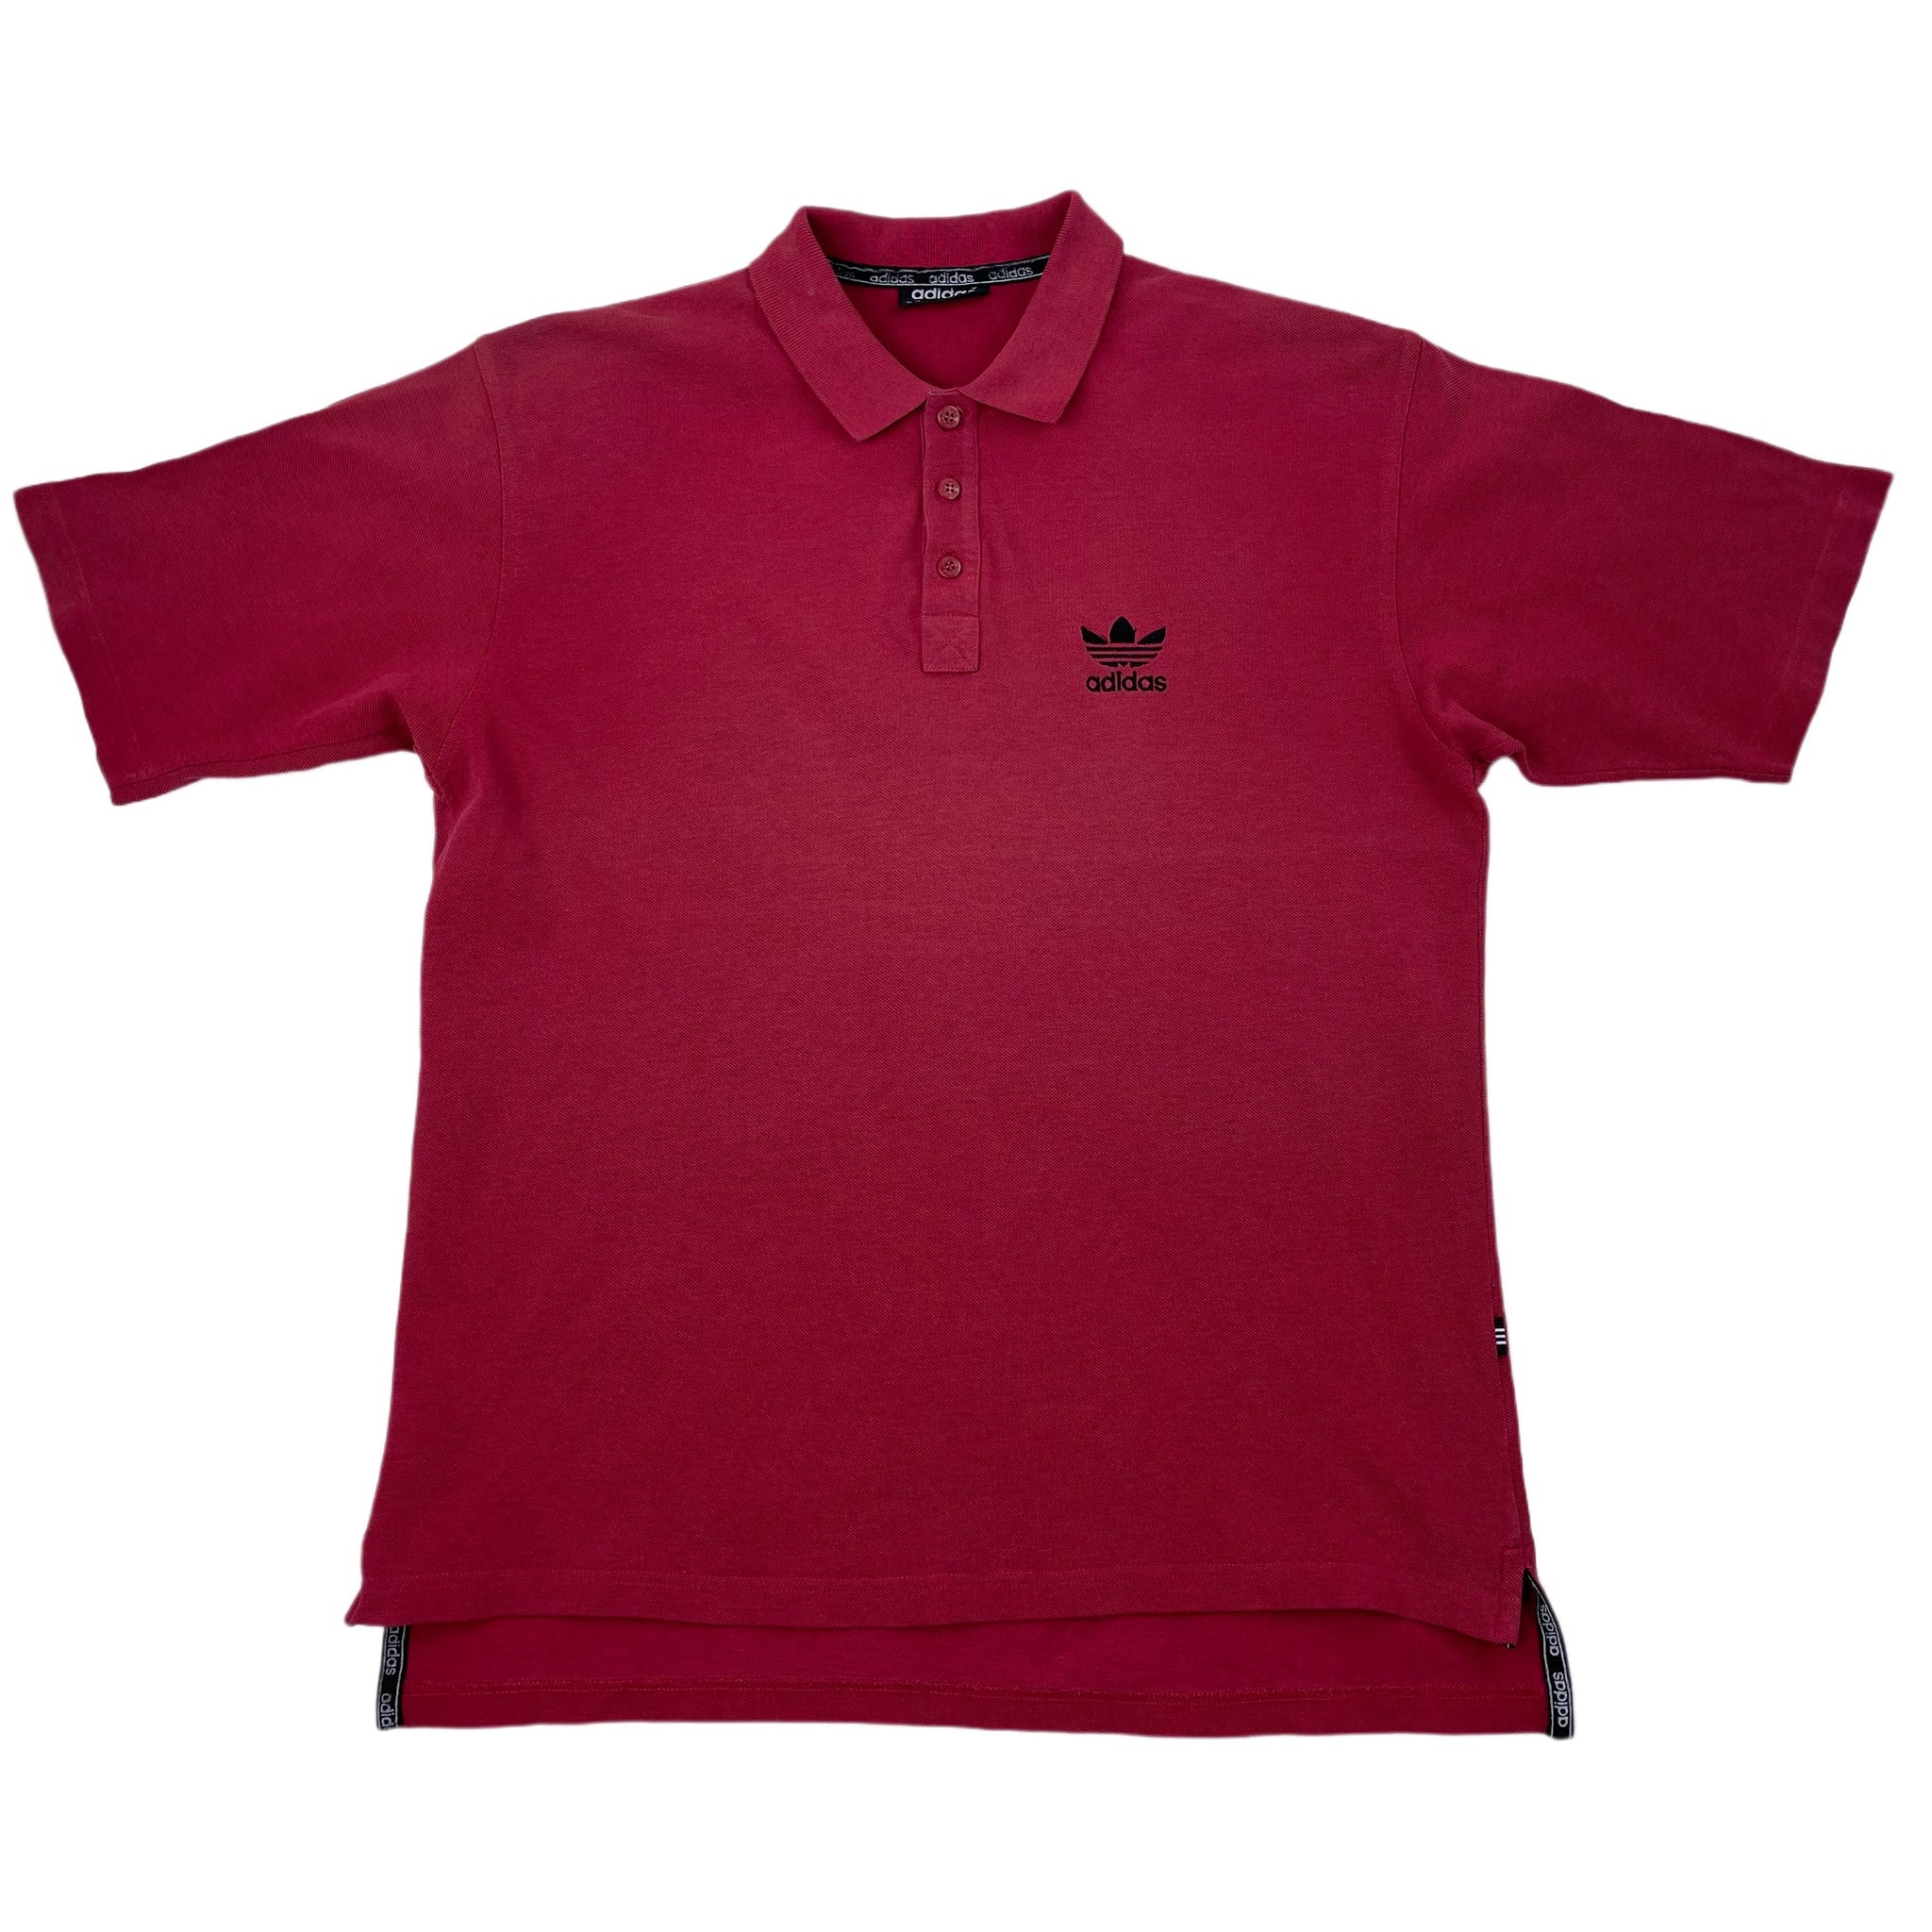 Vintage Red Adidas Polo Shirt 90s - L